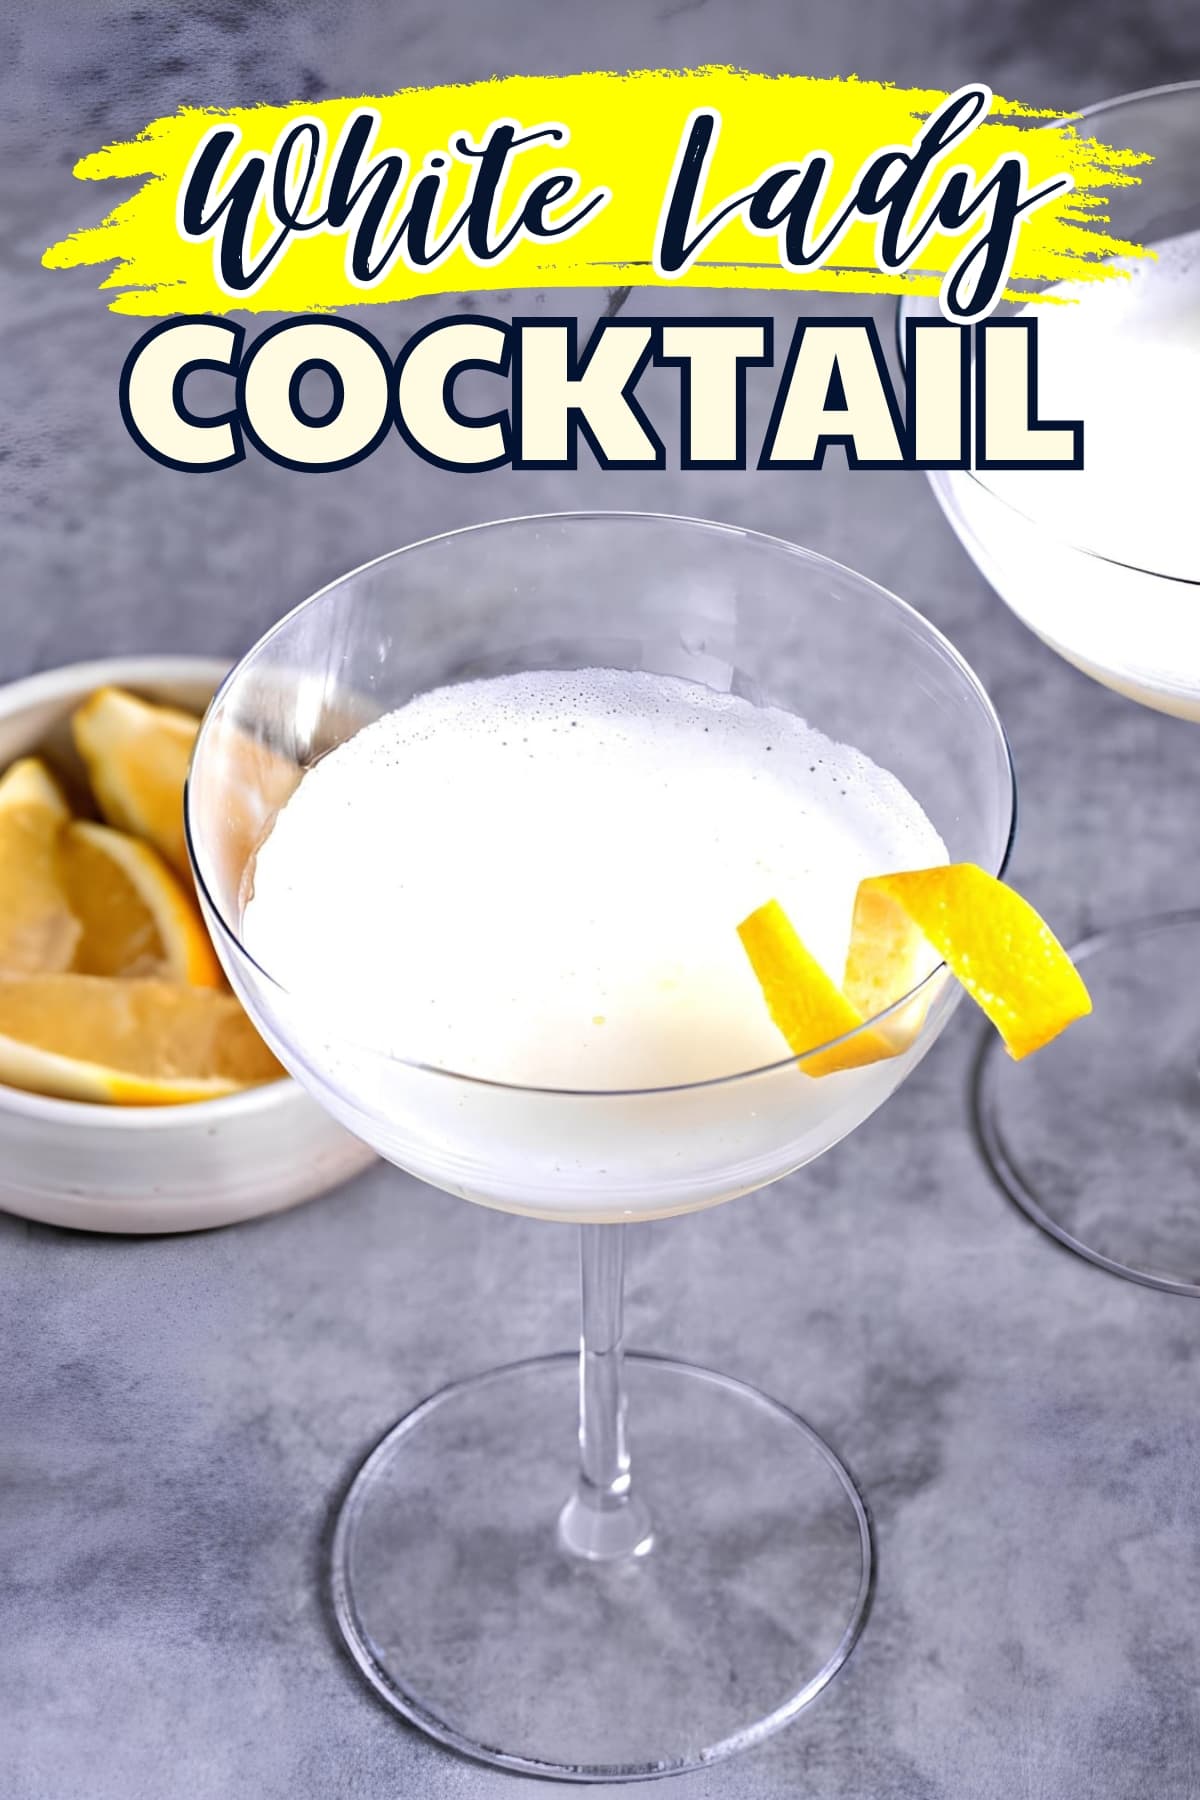 White Lady Cocktail